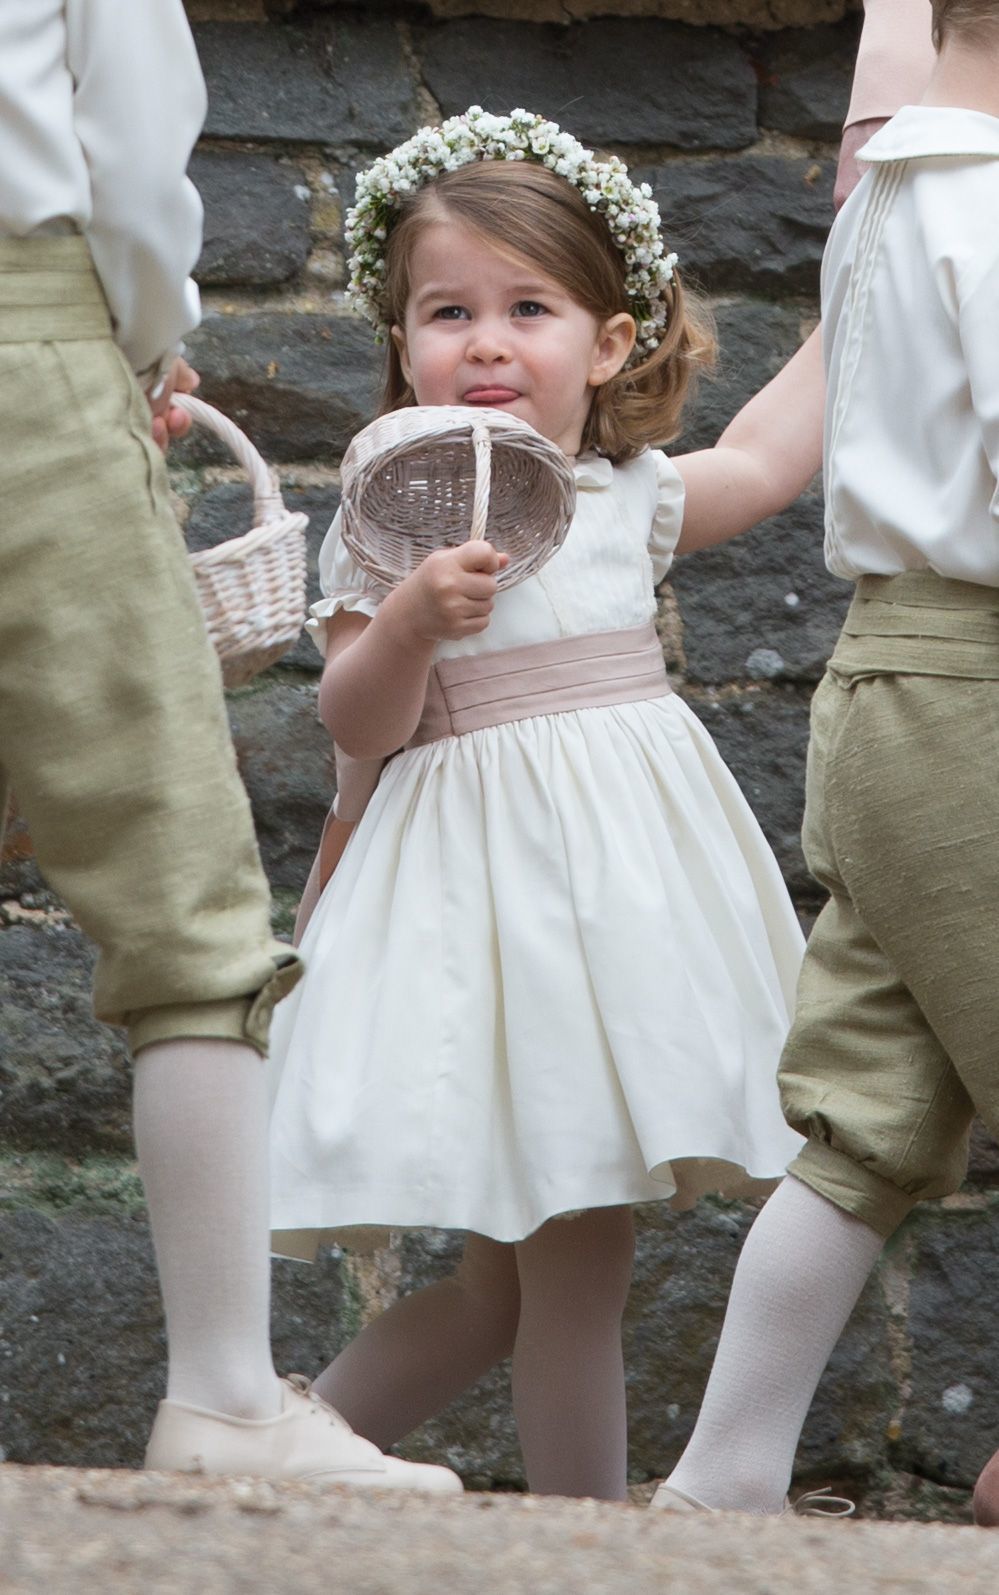 <p>Little bridesmaid Princess Charlotte rocked a flower crown at aunt <a href="https://www.wonderwall.com/celebrity/profiles/overview/pippa-middleton-1381.article">Pippa Middleton</a>'s <a href="https://www.wonderwall.com/celebrity/photos/pippa-middleton-marries-james-matthews-best-photos-their-wedding-day-3006704.gallery">wedding</a> at St. Mark's Church in Englefield, England, on May 20, 2017.</p>